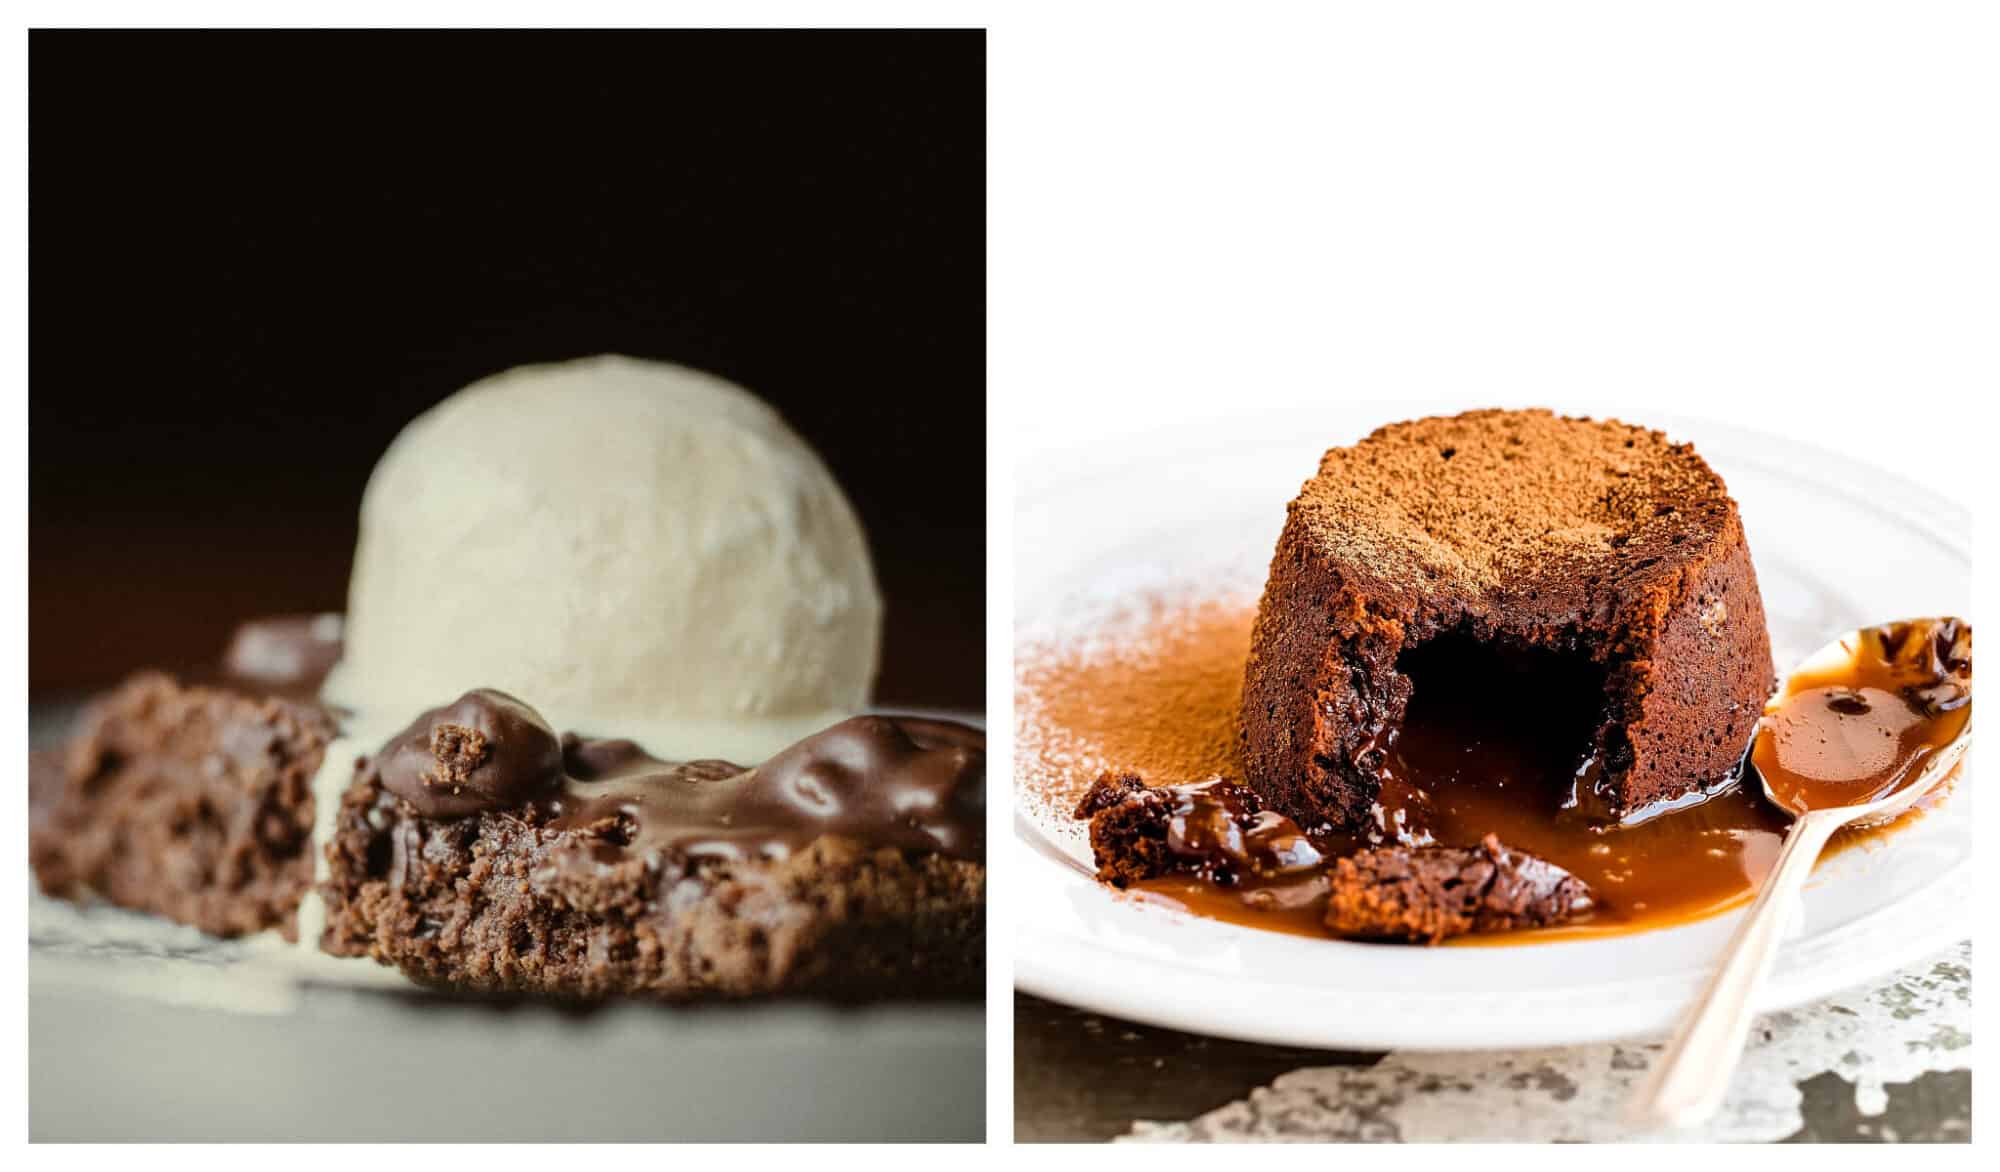 Left: a warm brownie with ice cream on the top; right: a chocolate fondant cut open with chocolate sauce oozing out and cocoa sprinkled on top.